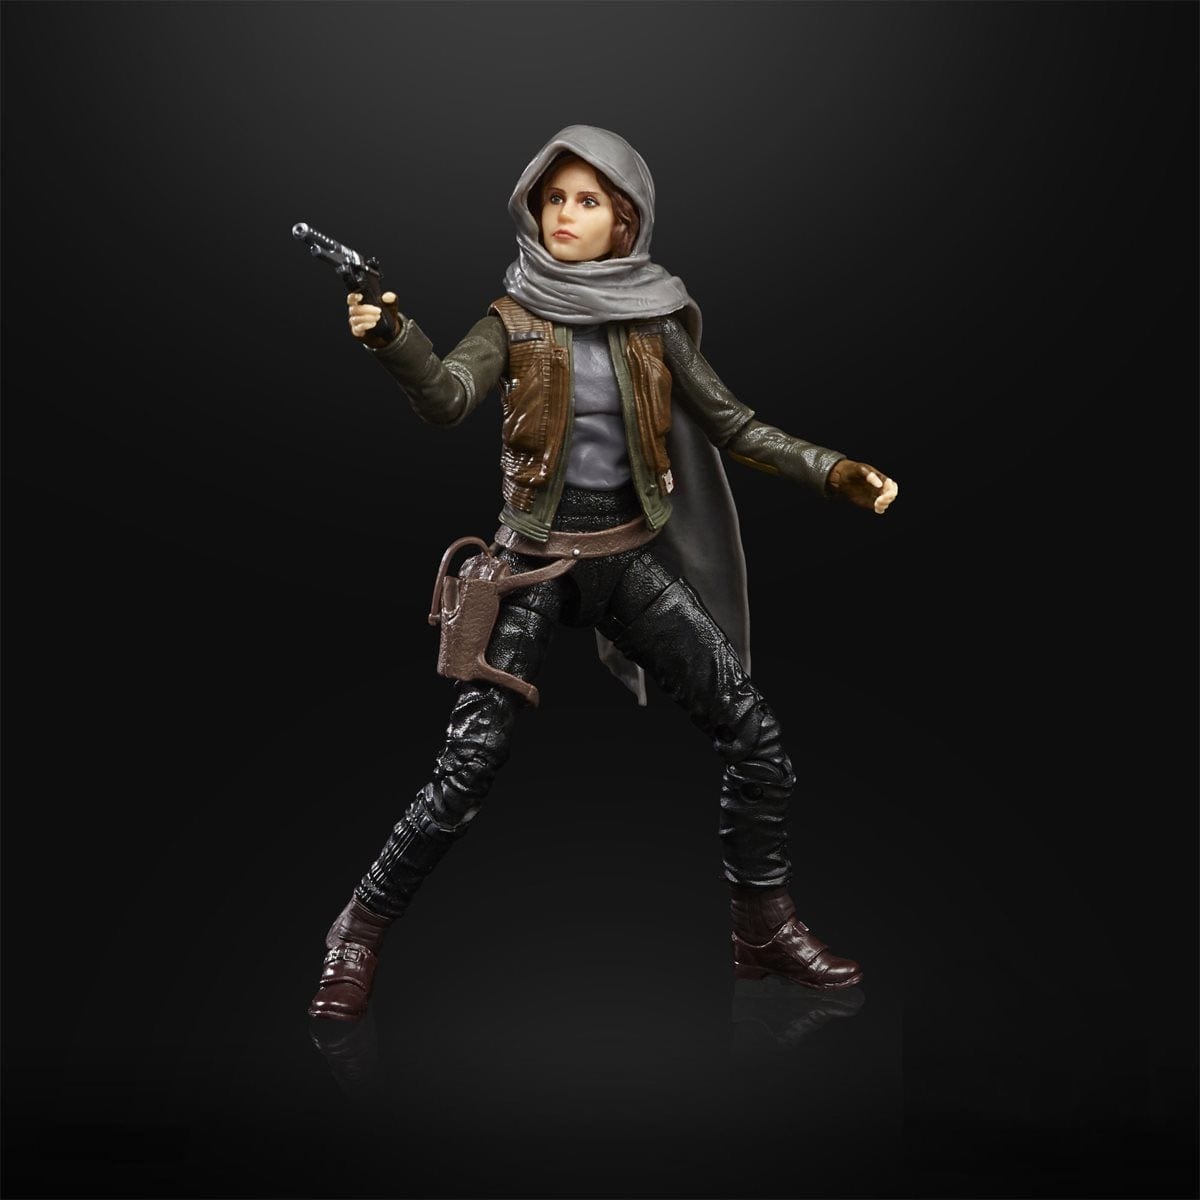 LOOSE - No Package Star Wars The Black Series Jyn Erso 6-Inch Action Figure - Pop-O-Loco - Hasbro